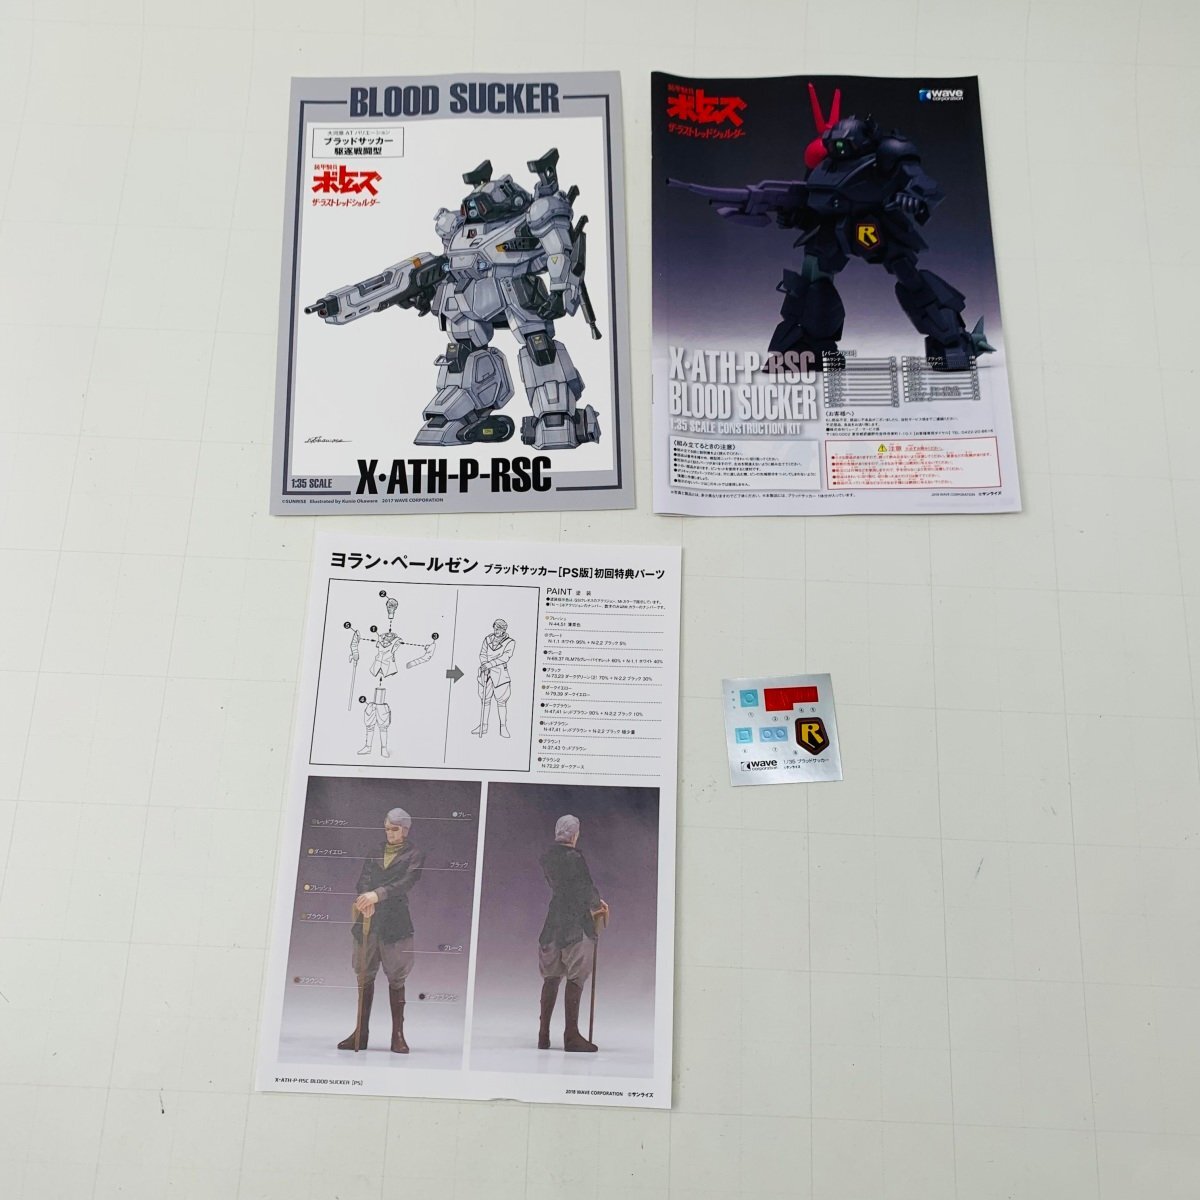  new goods not yet constructed Wave Armored Trooper Votoms The * last red shoulder 1/35 X*ATH-RSCb Lad soccer PS version the first times limitated production version 